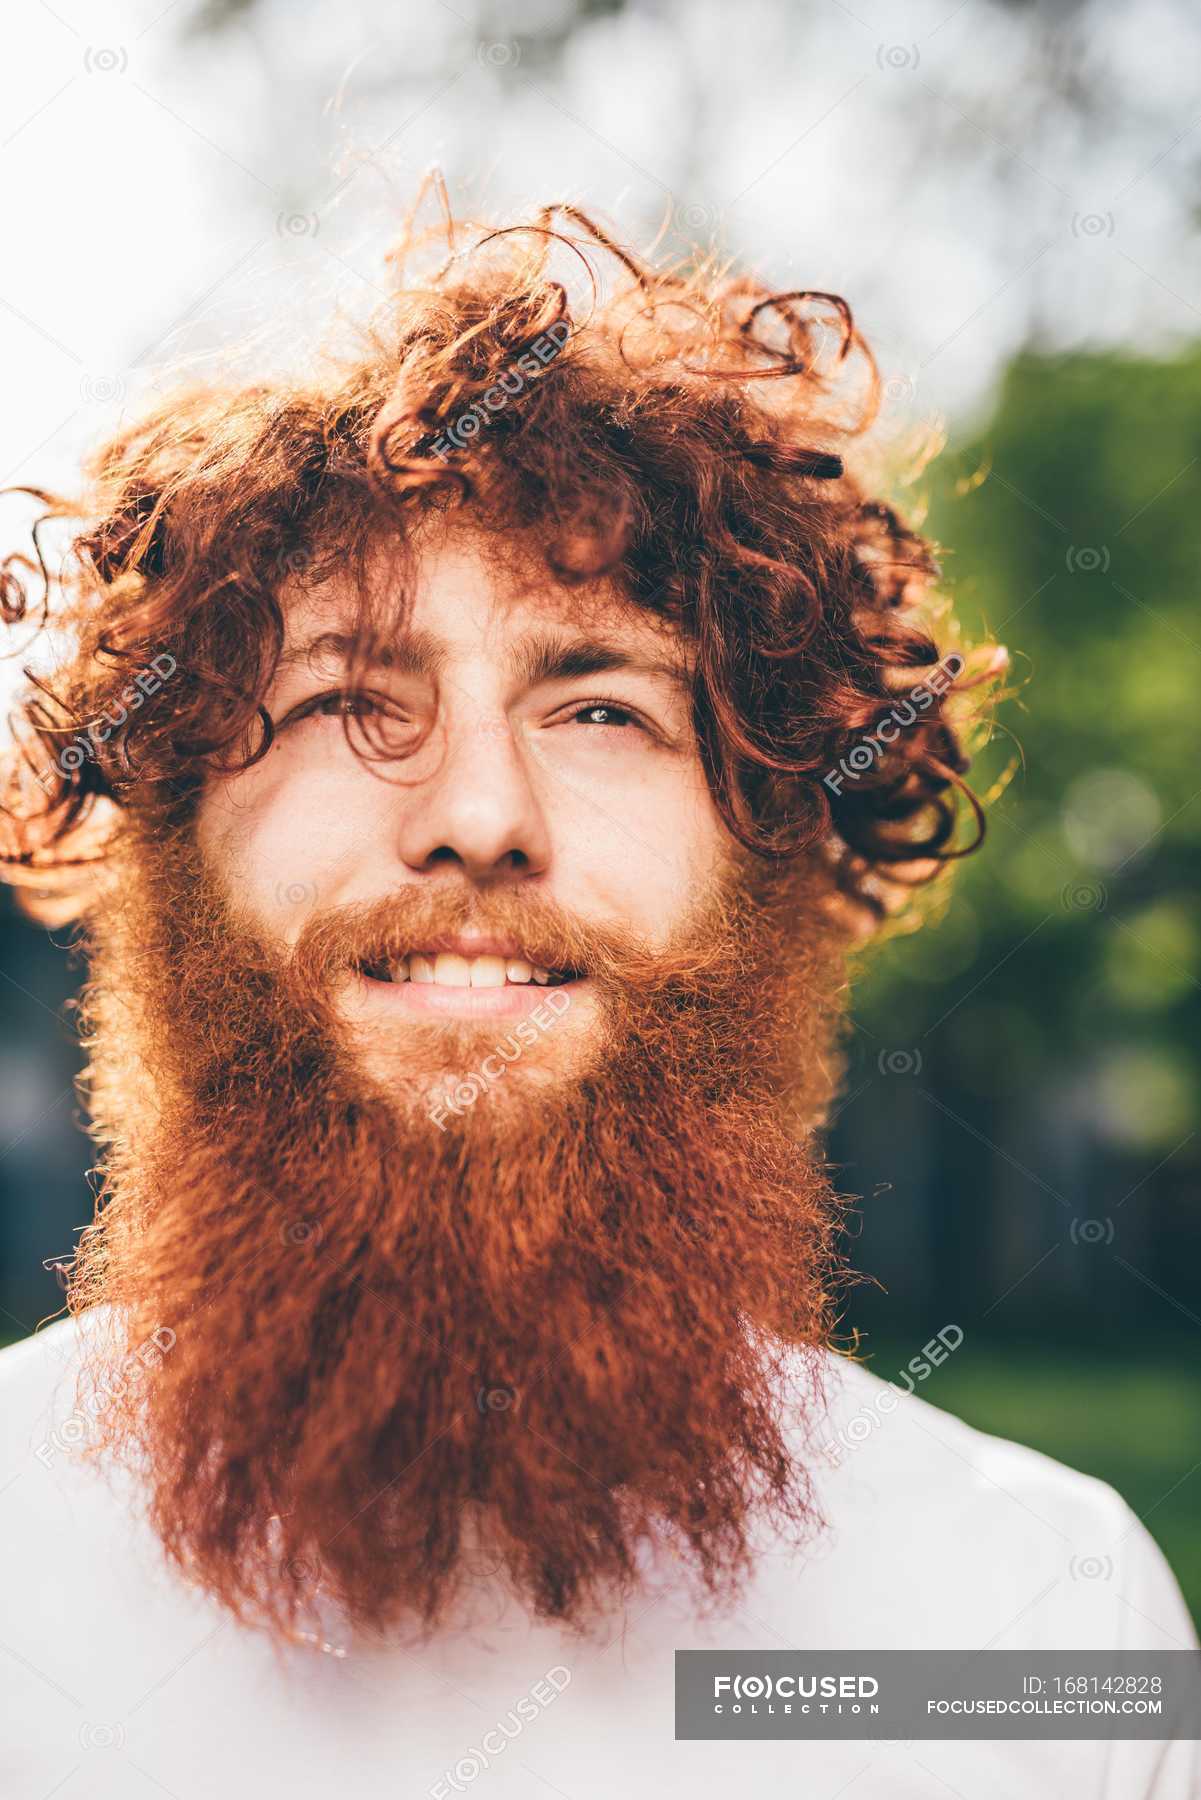 Portrait of young male hipster with curly red hair and beard in park —  leisure, outdoors - Stock Photo | #168142828